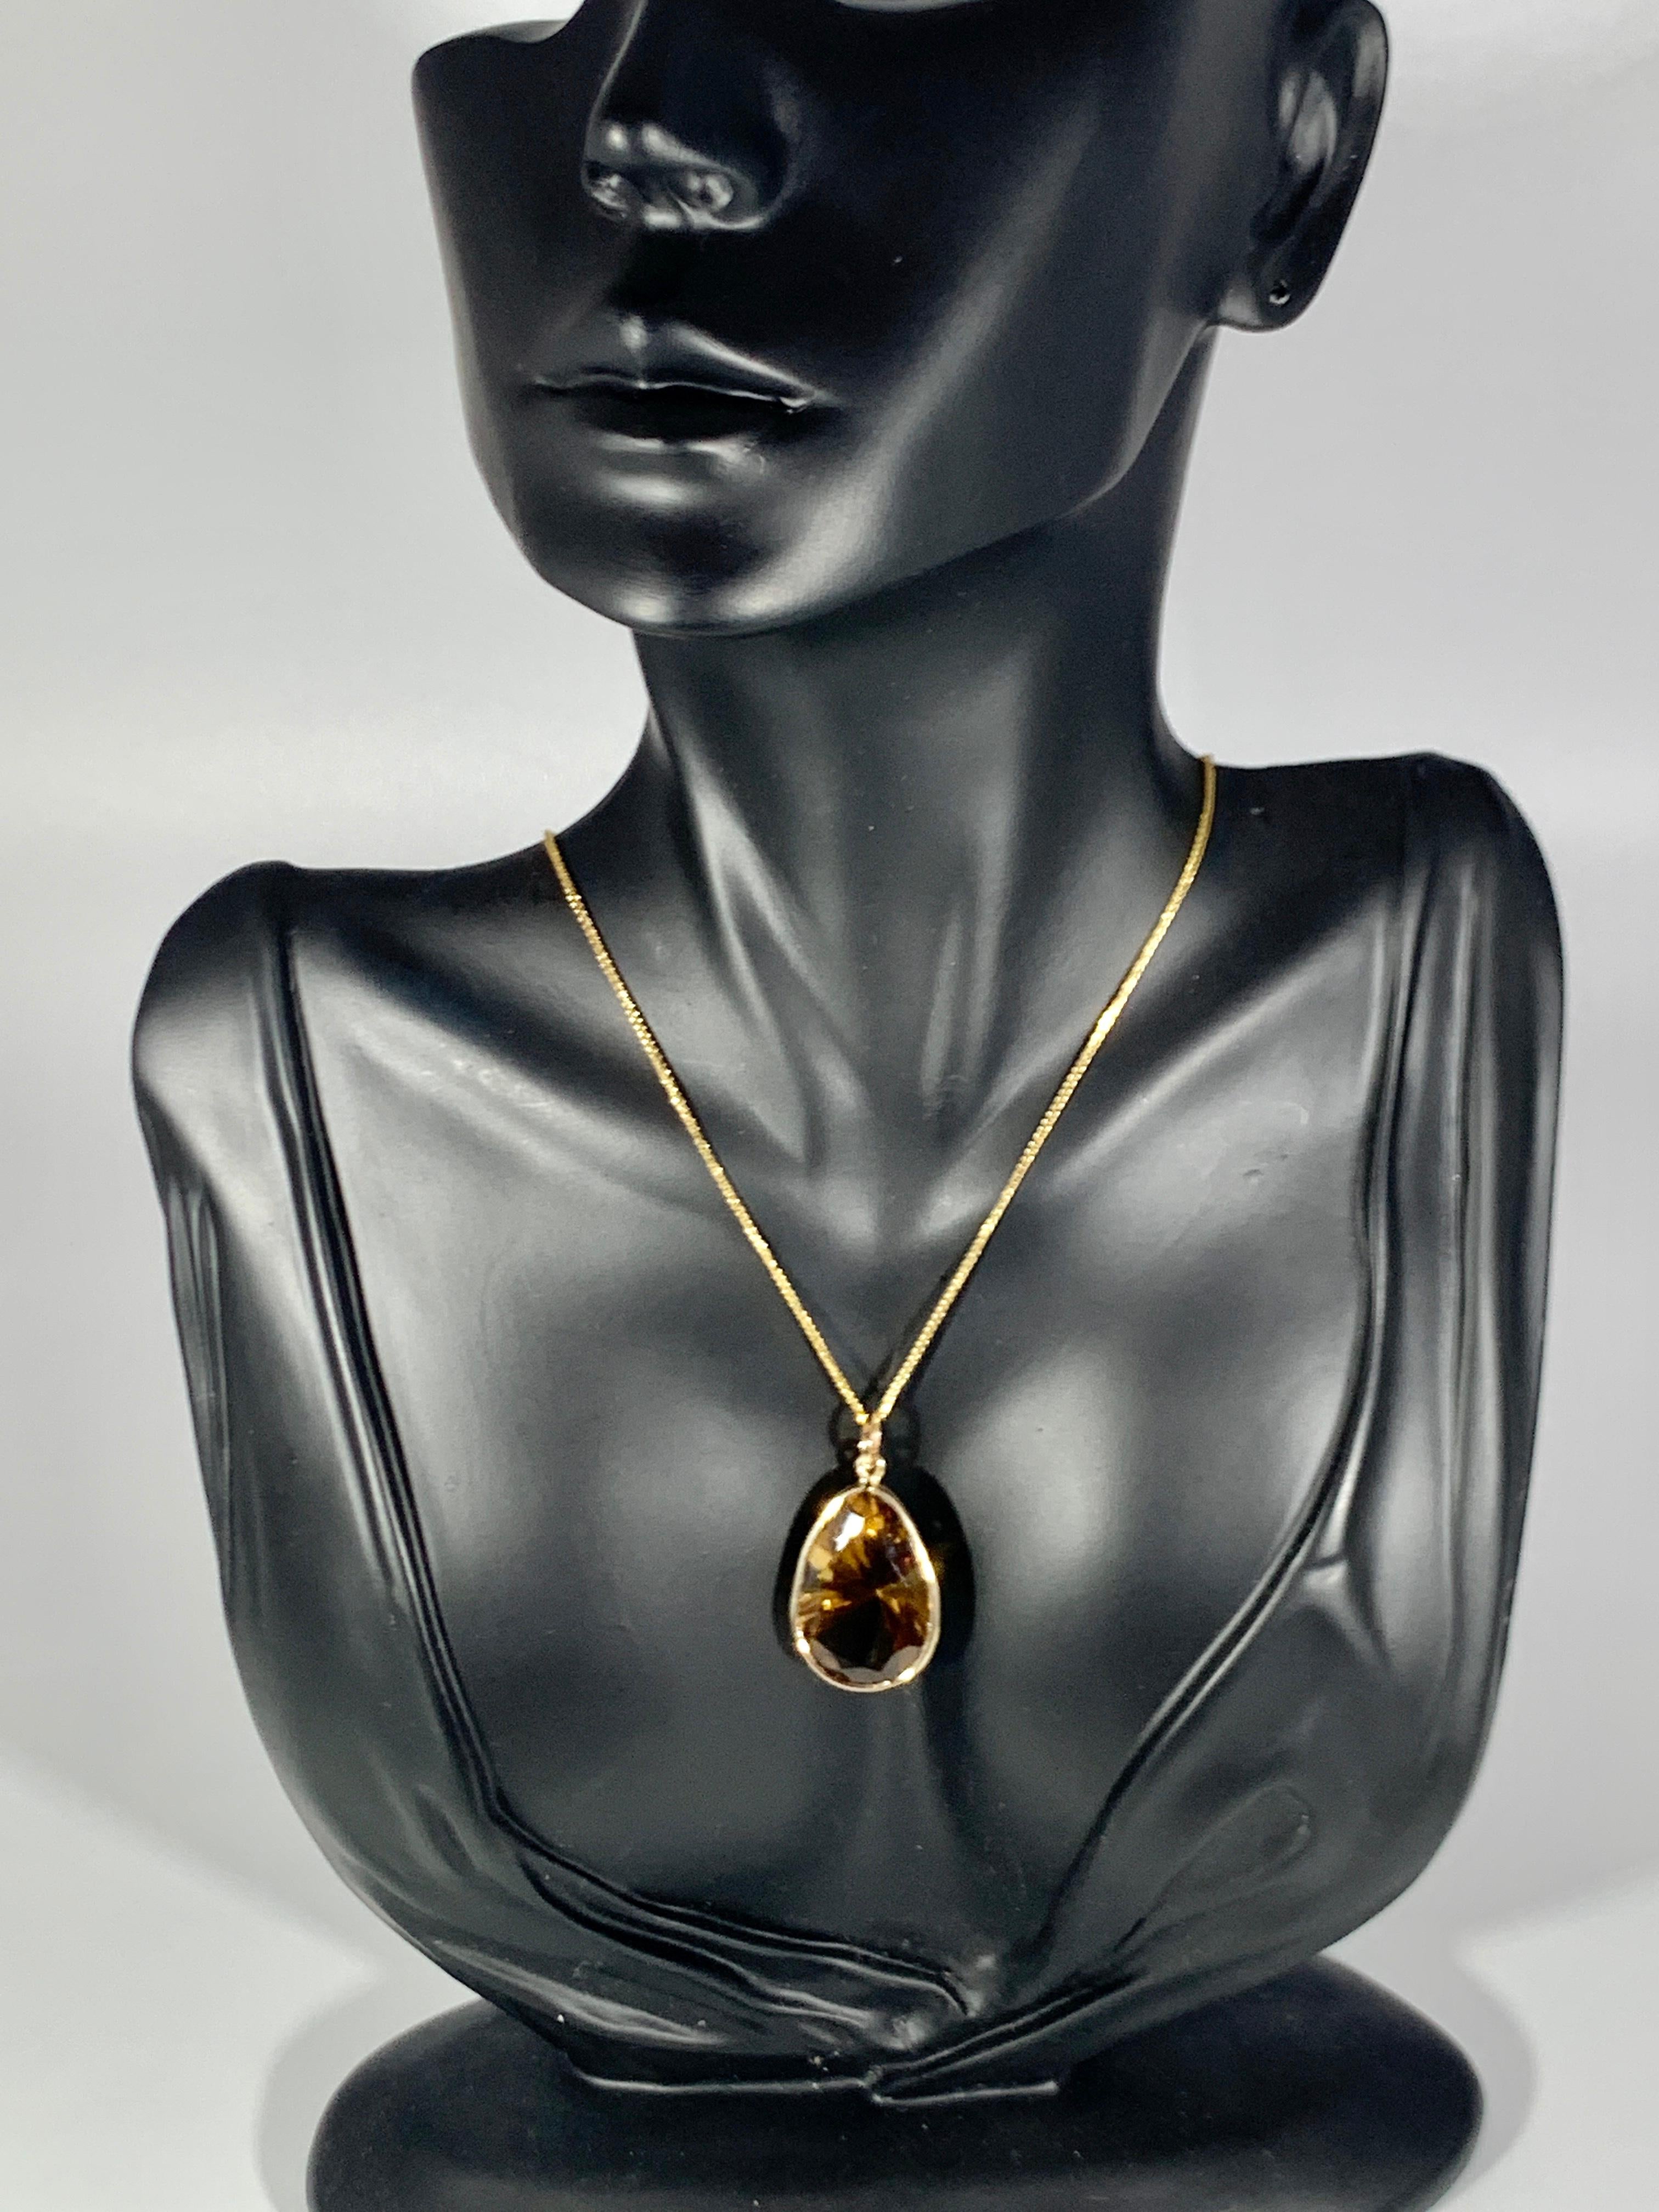 19 Carat Pear Shape Citrine Pendent or Necklace 14 Karat Yellow Gold with Chain 4